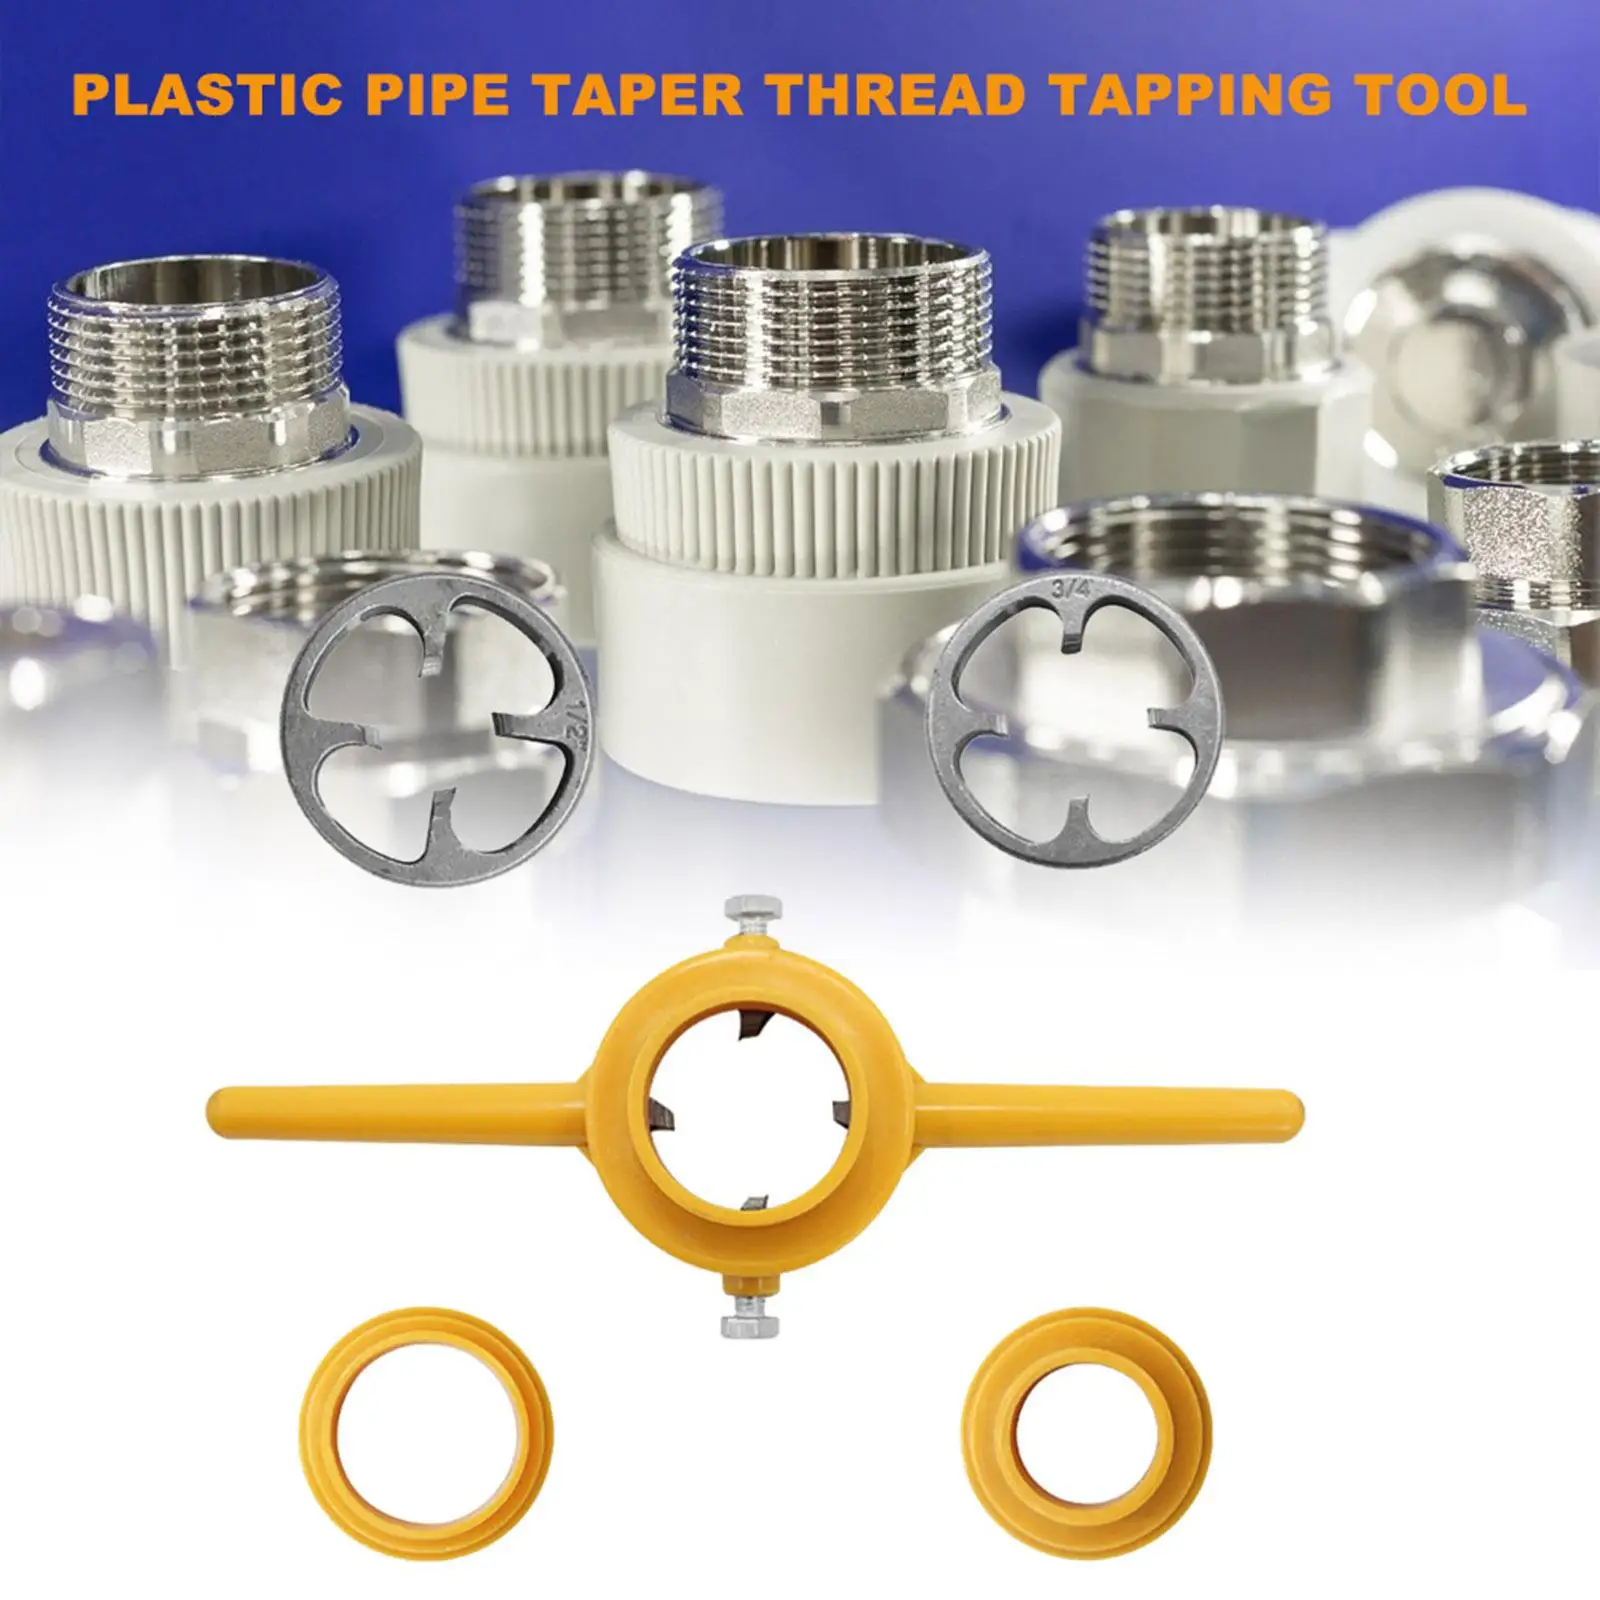 PVC Thread Maker Tools NPT Die Set Sizes 1/2 inch 3/4 inch 1 inch Taps & Dies Tap and Die Set Maker Pipe for Home Pumps Pipes